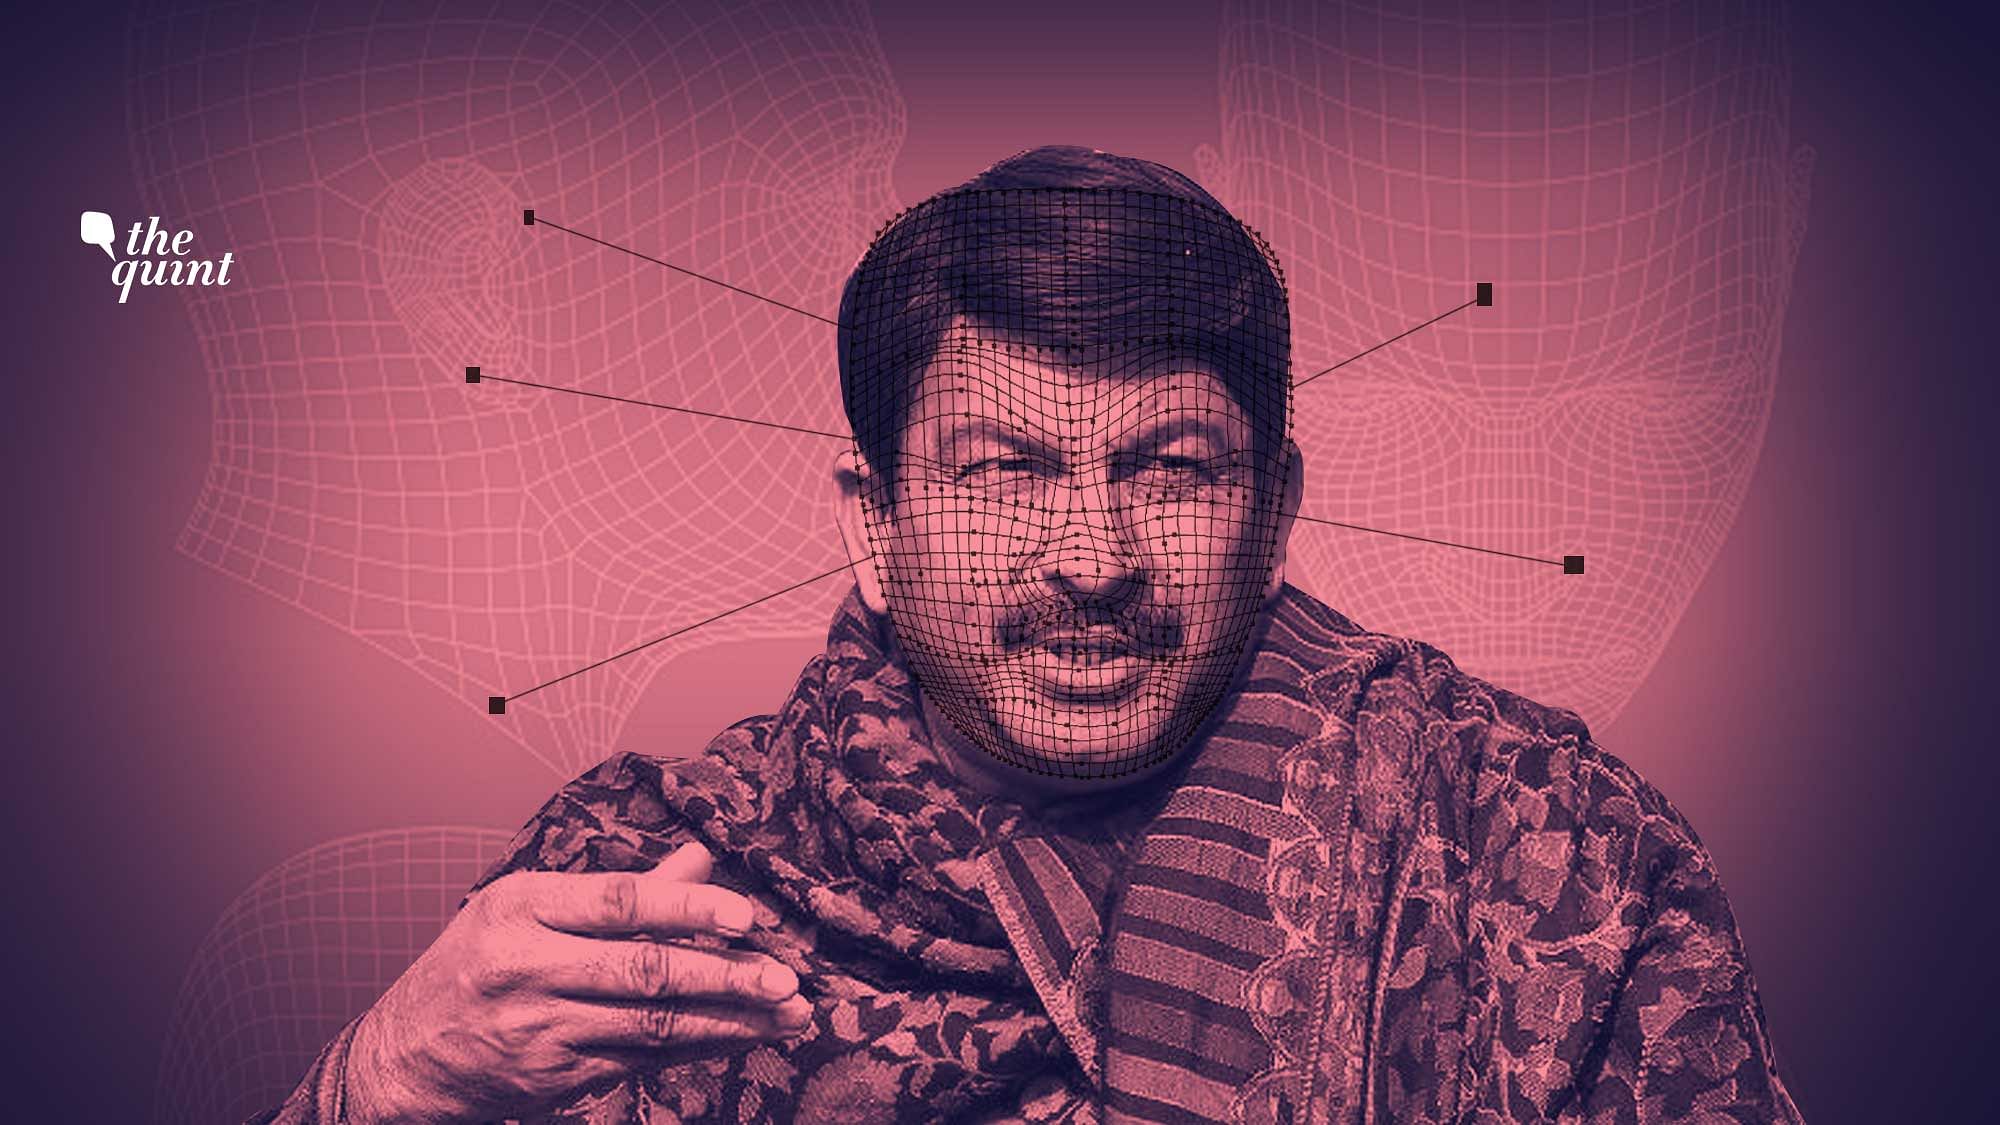 Ahead of the recently concluded Delhi Assembly election on 8 February, BJP President Manoj Tiwari used deepfake technology to reach out to a larger voter base.